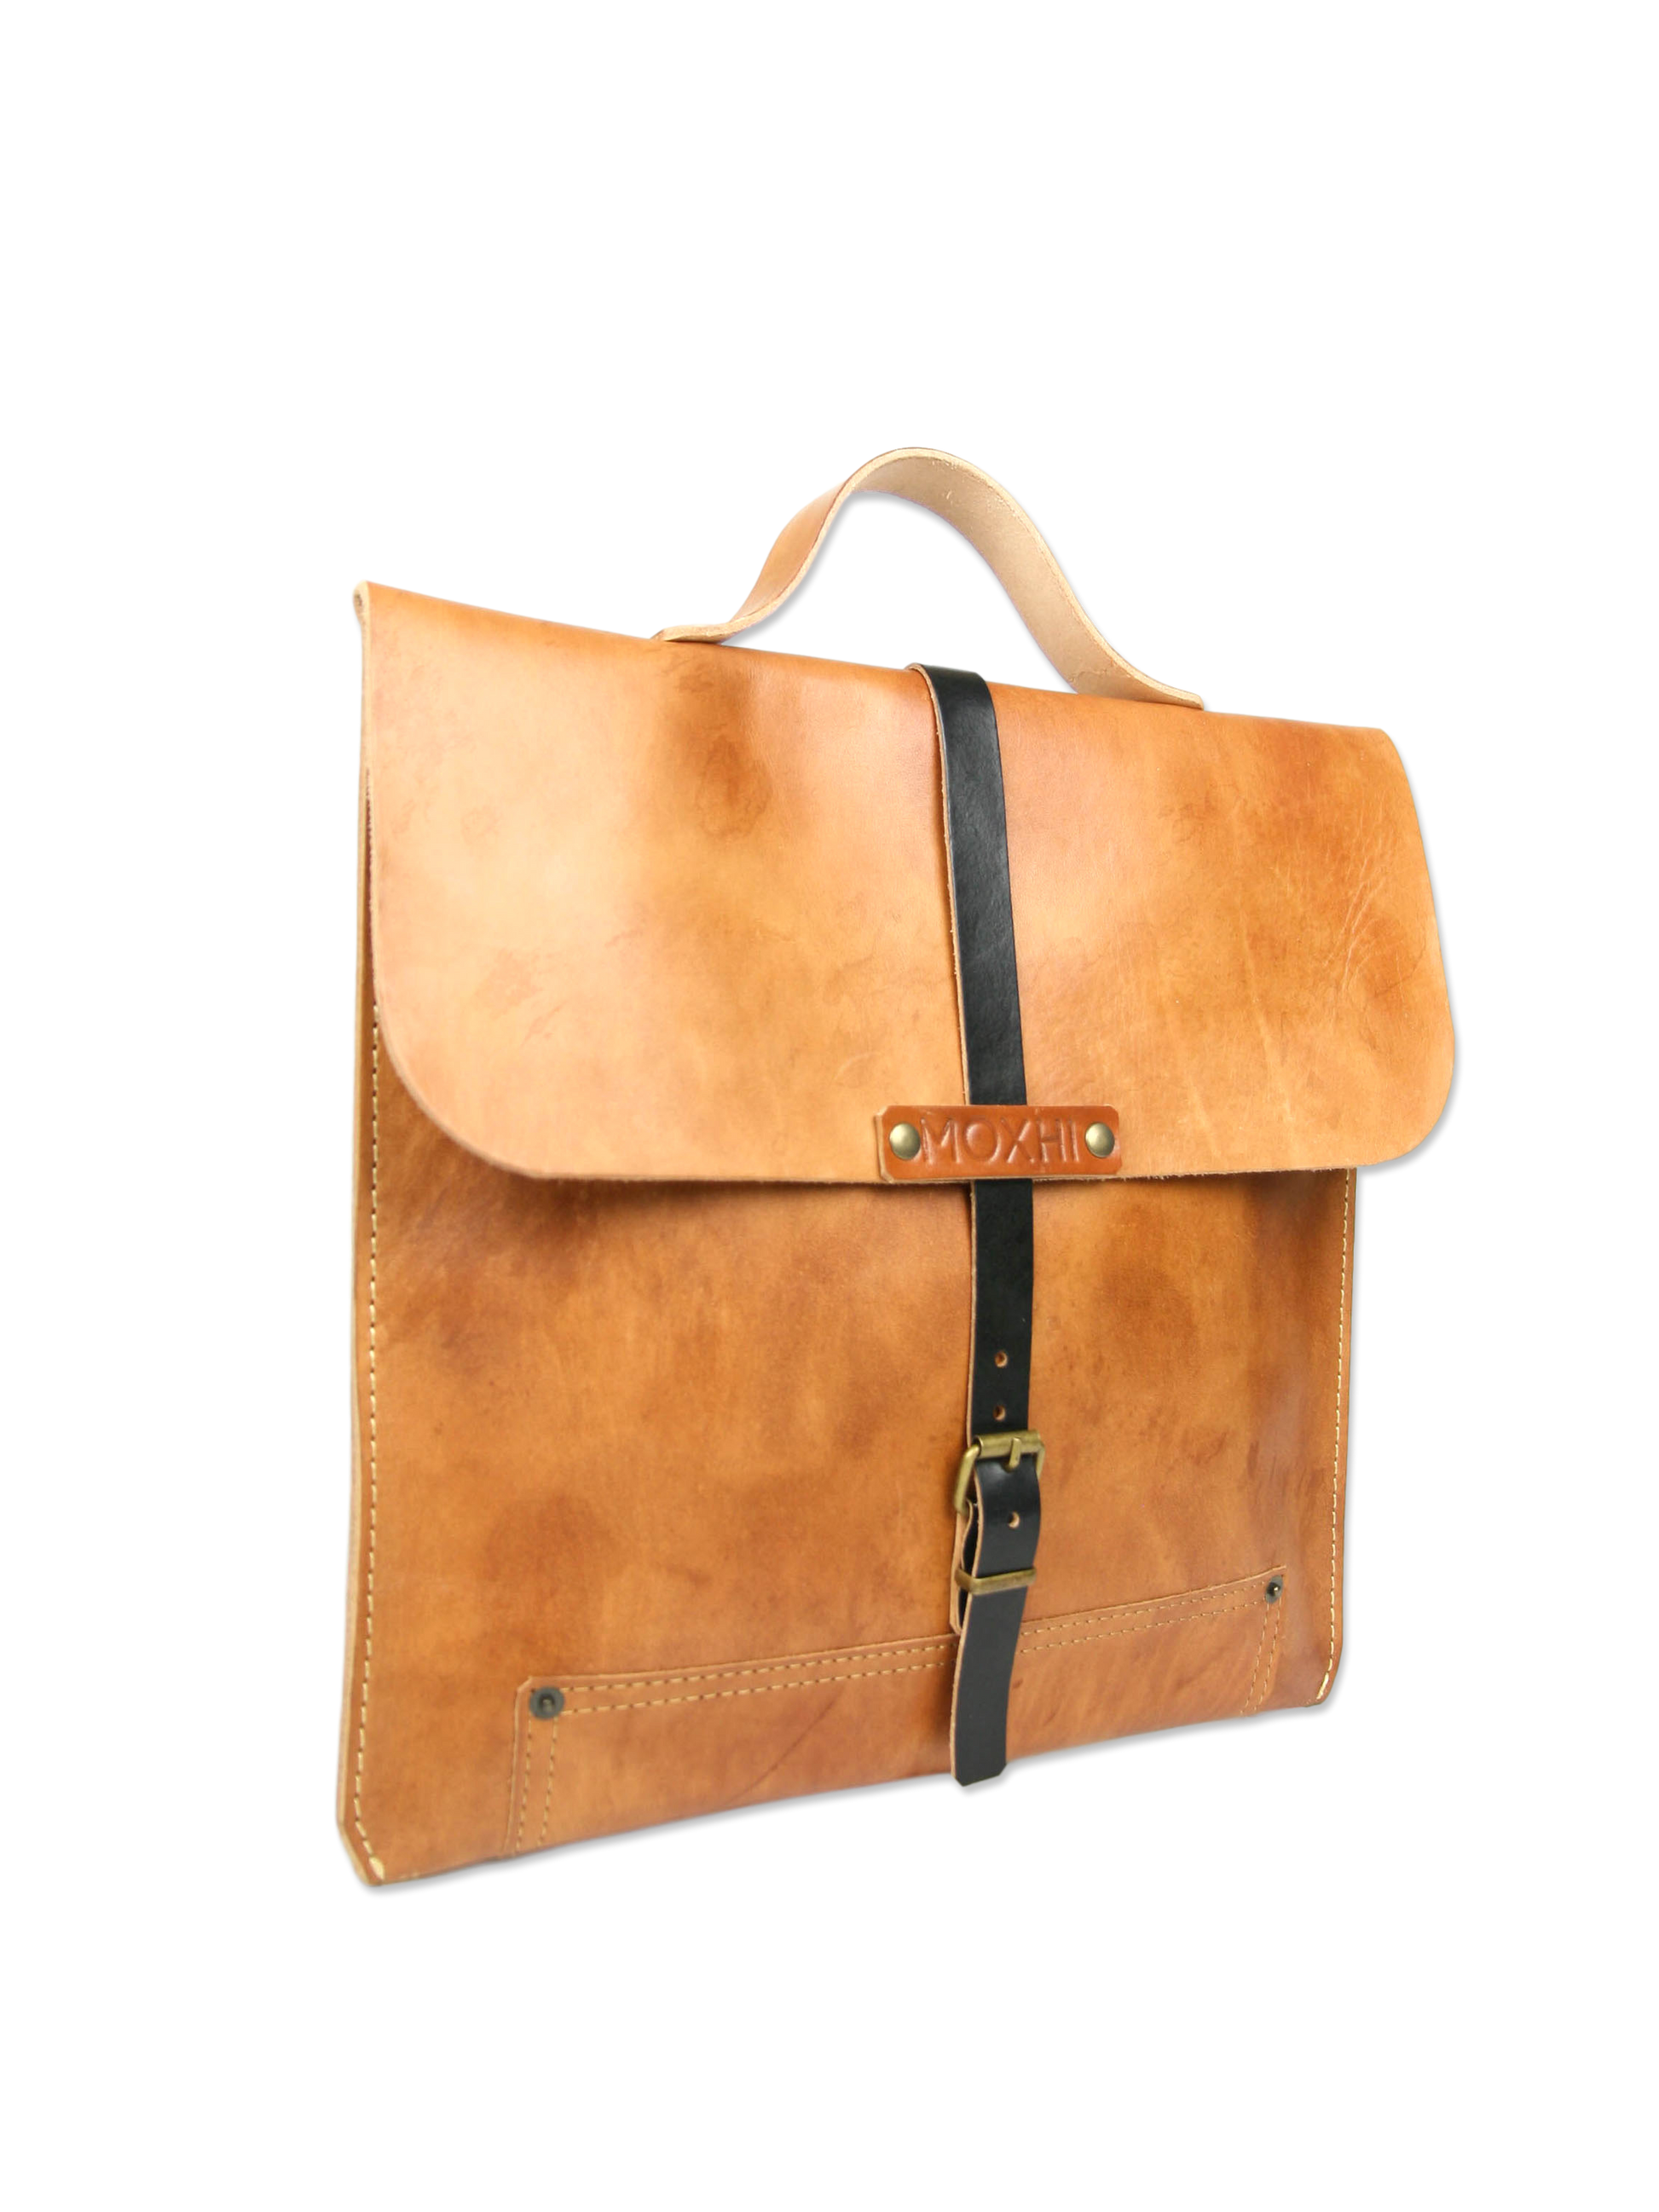 Classic handmade leather briefcase